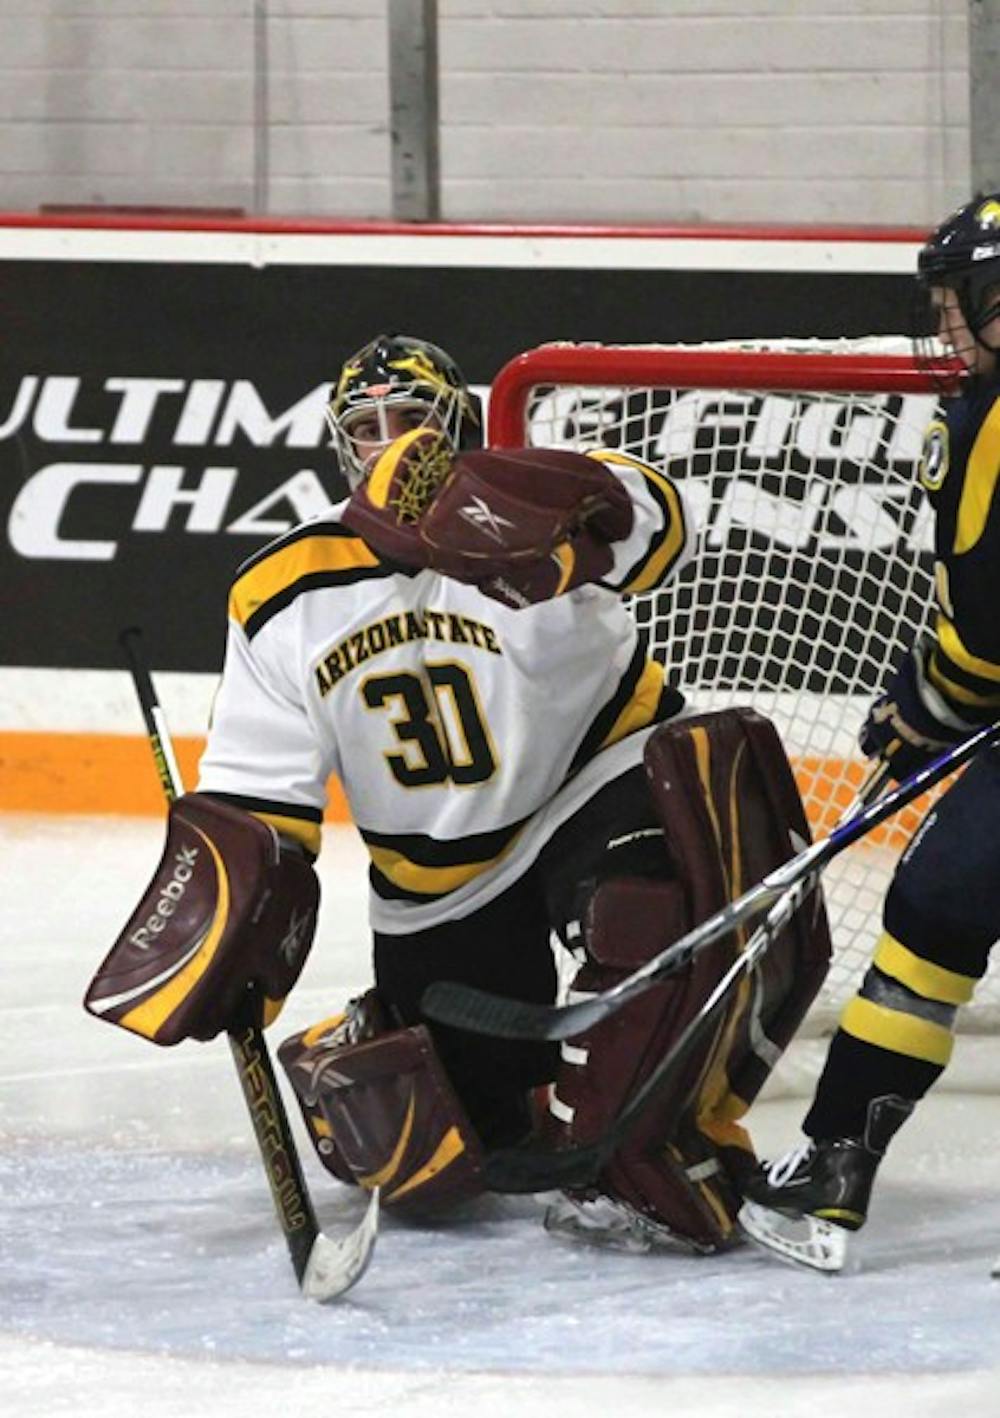 ASU senior goaltender Mark Shacker makes a glove save during the Sun Devils’ game against Central Oklahoma on Oct. 29. The No. 4 ASU squad swept No. 6 Ohio with the help of some great play by Shacker. (Photo by Lisa Bartoli)